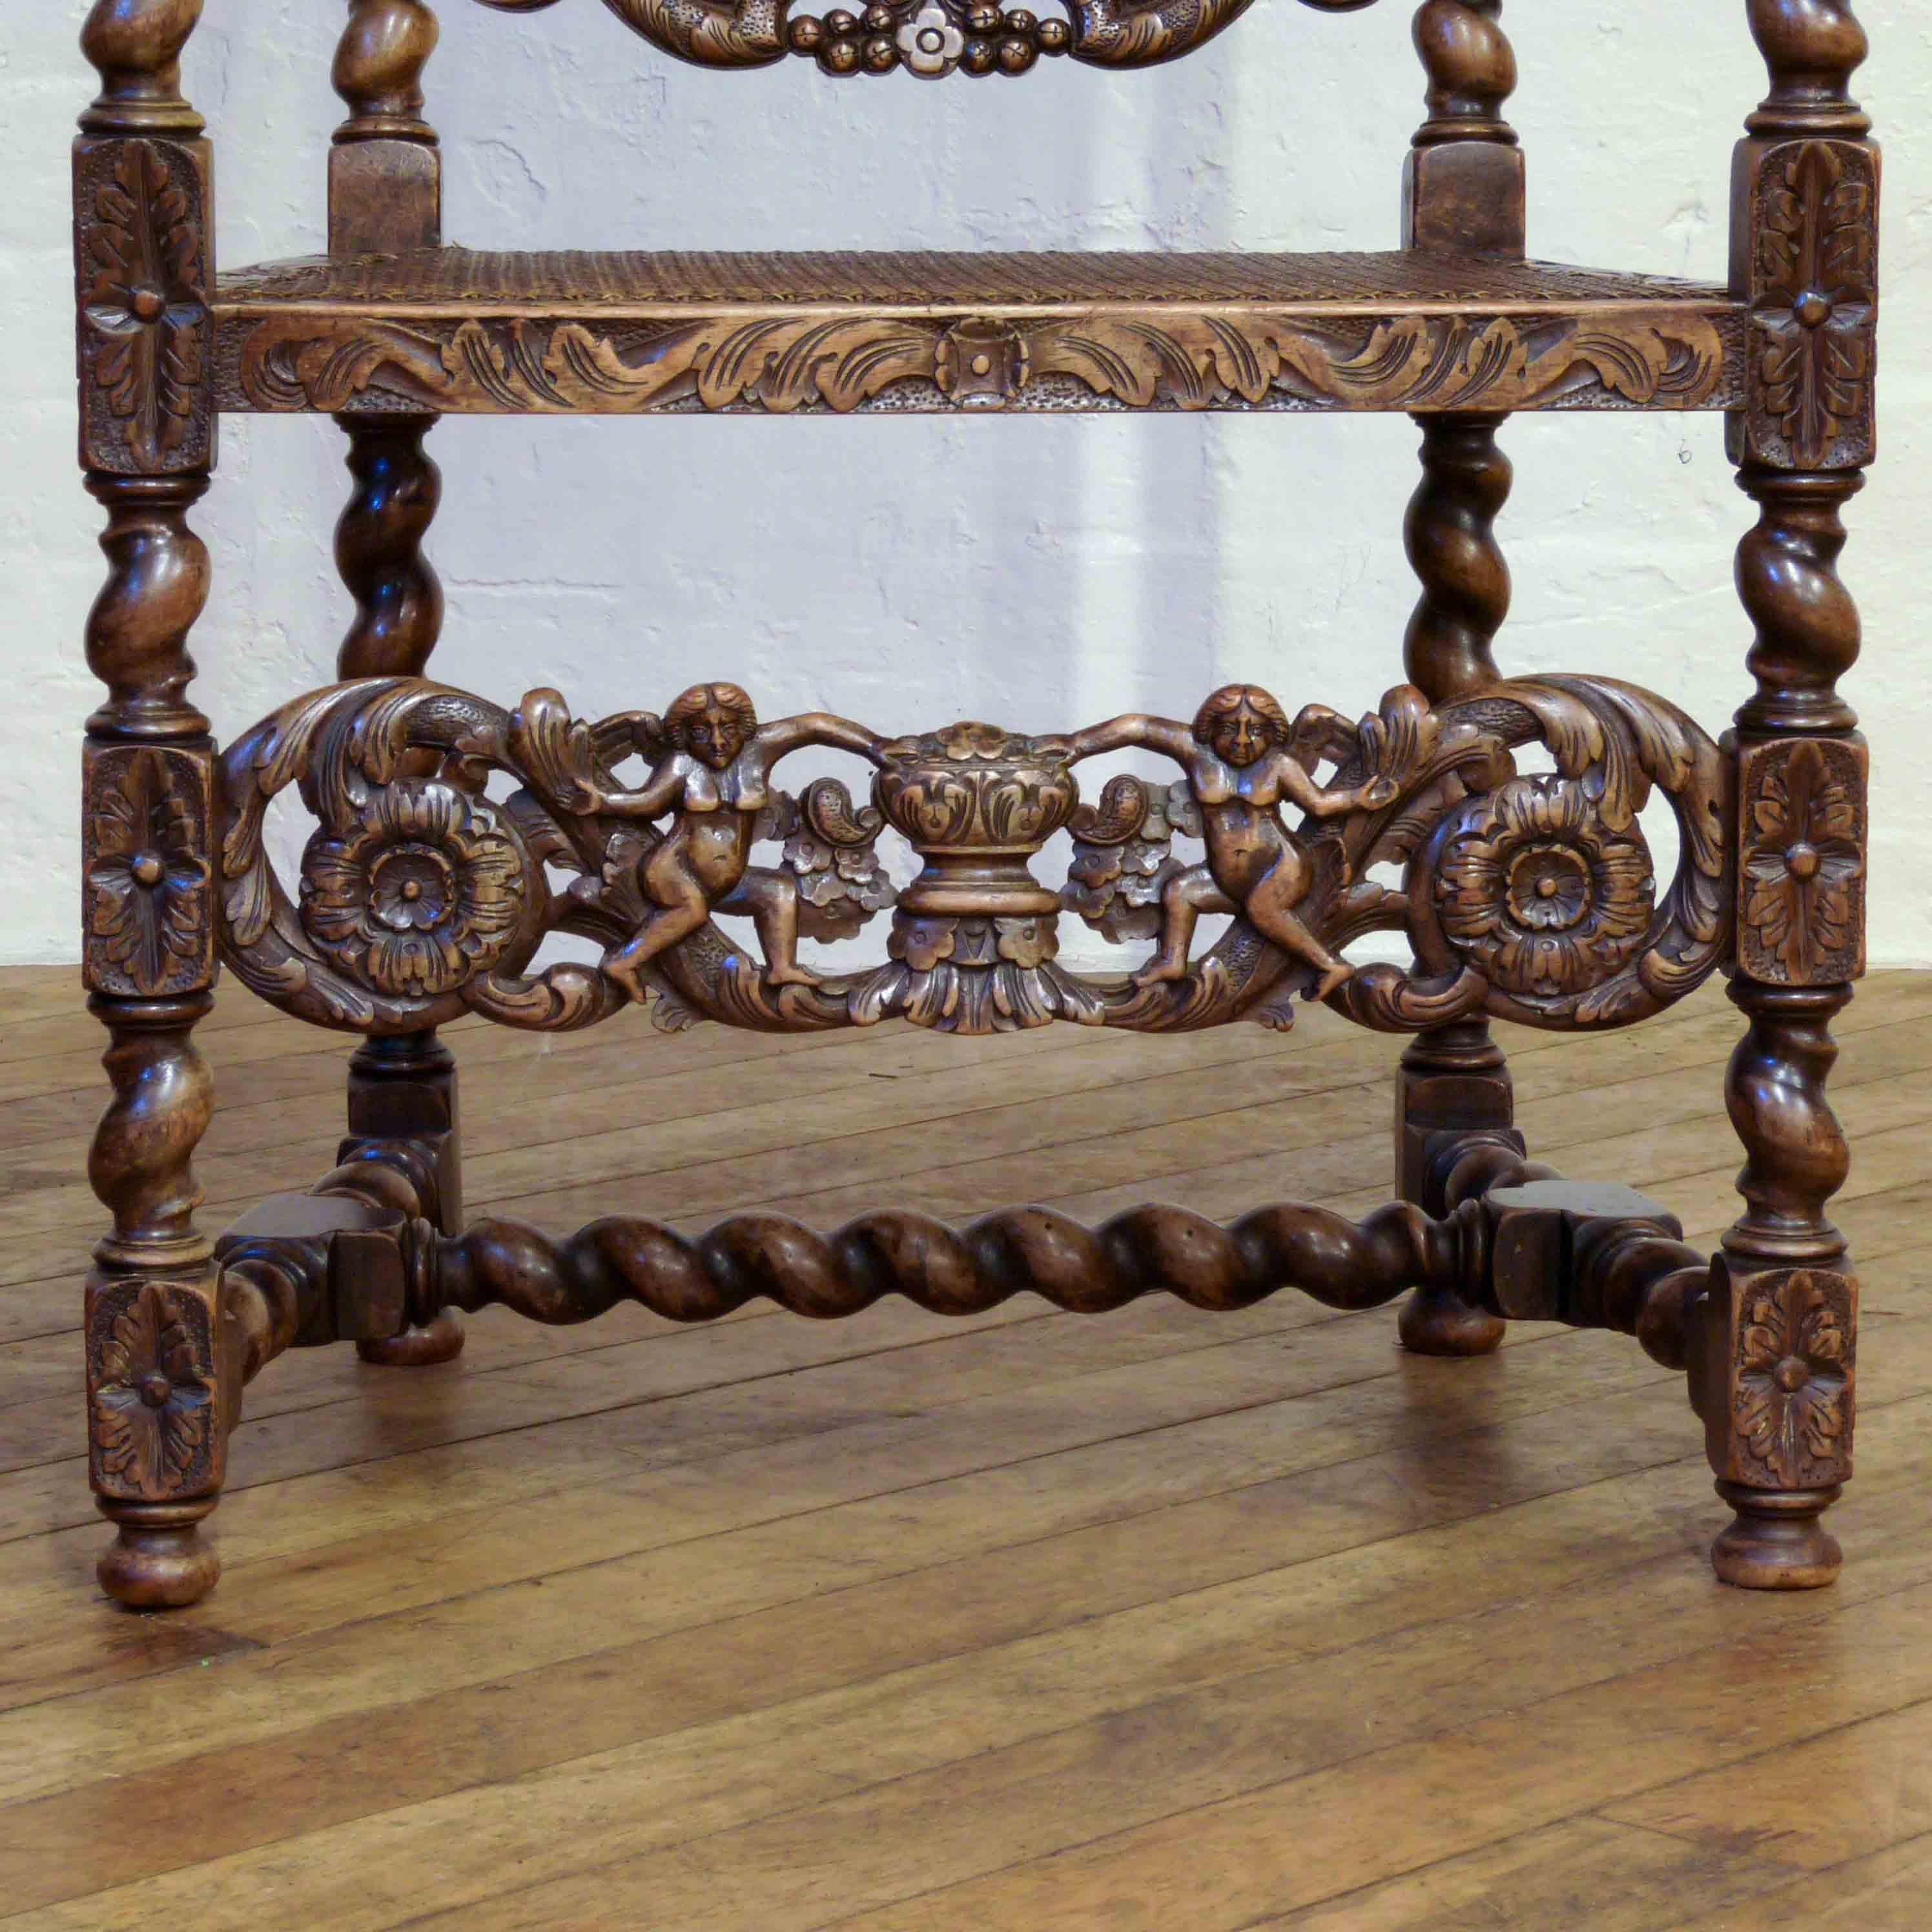 An exceptional walnut chair made in the mid-17th century style. The top rail and lower stretcher carved with foliage, flowers and a pair of winged cherubs. The rest of the chair is carved throughout and the bergere panels to the seat and back are in